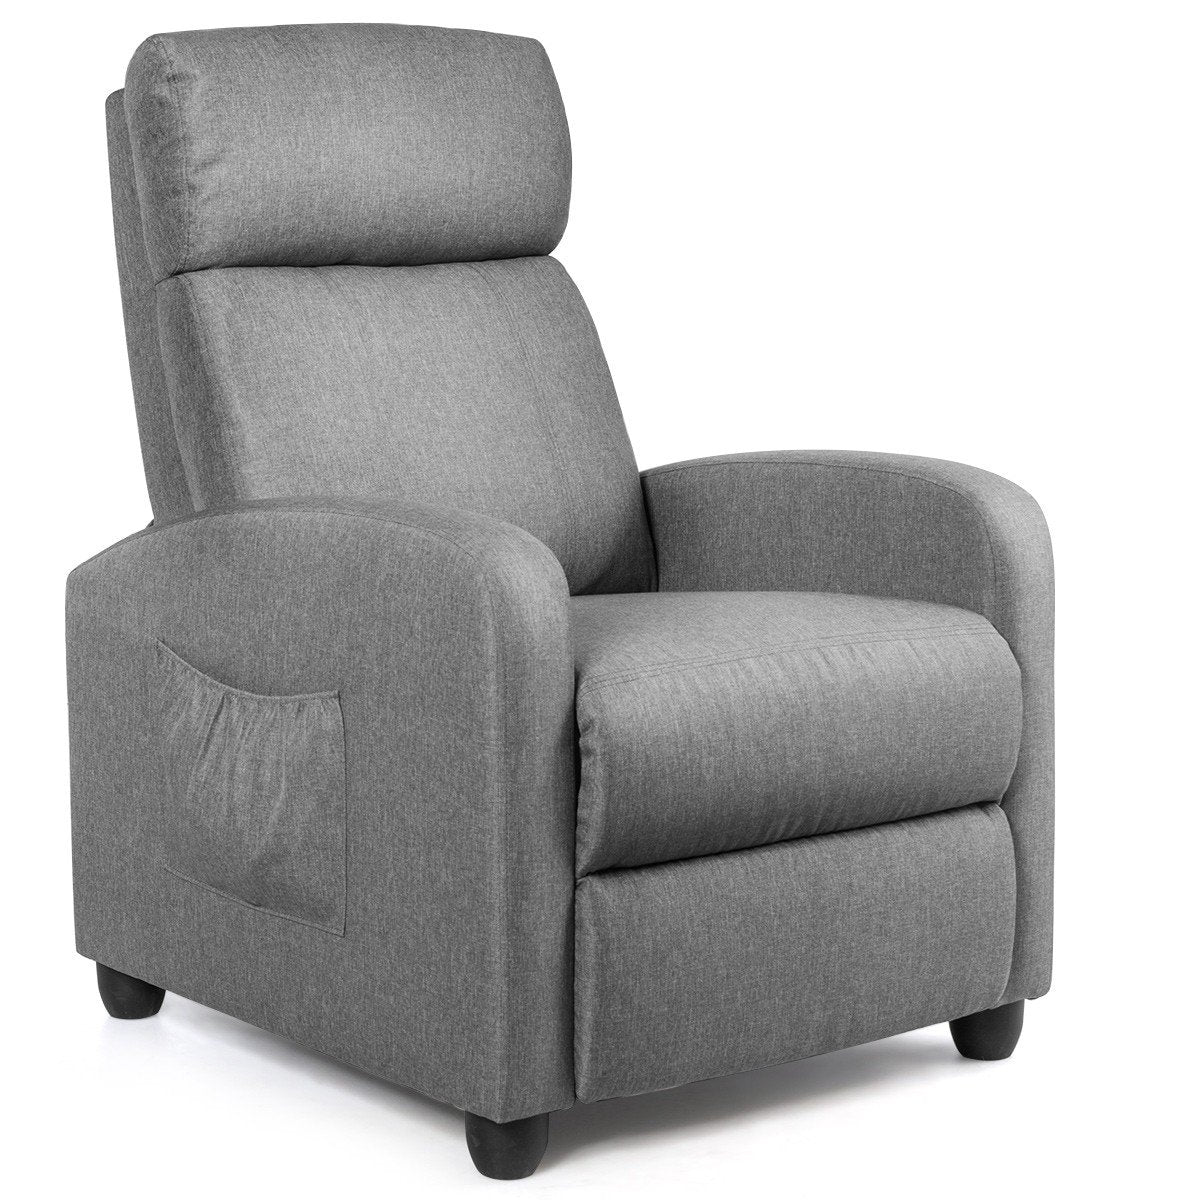 Giantex Recliner Chair for Living Room, Recliner Sofa Wingback Chair w/Massage Function